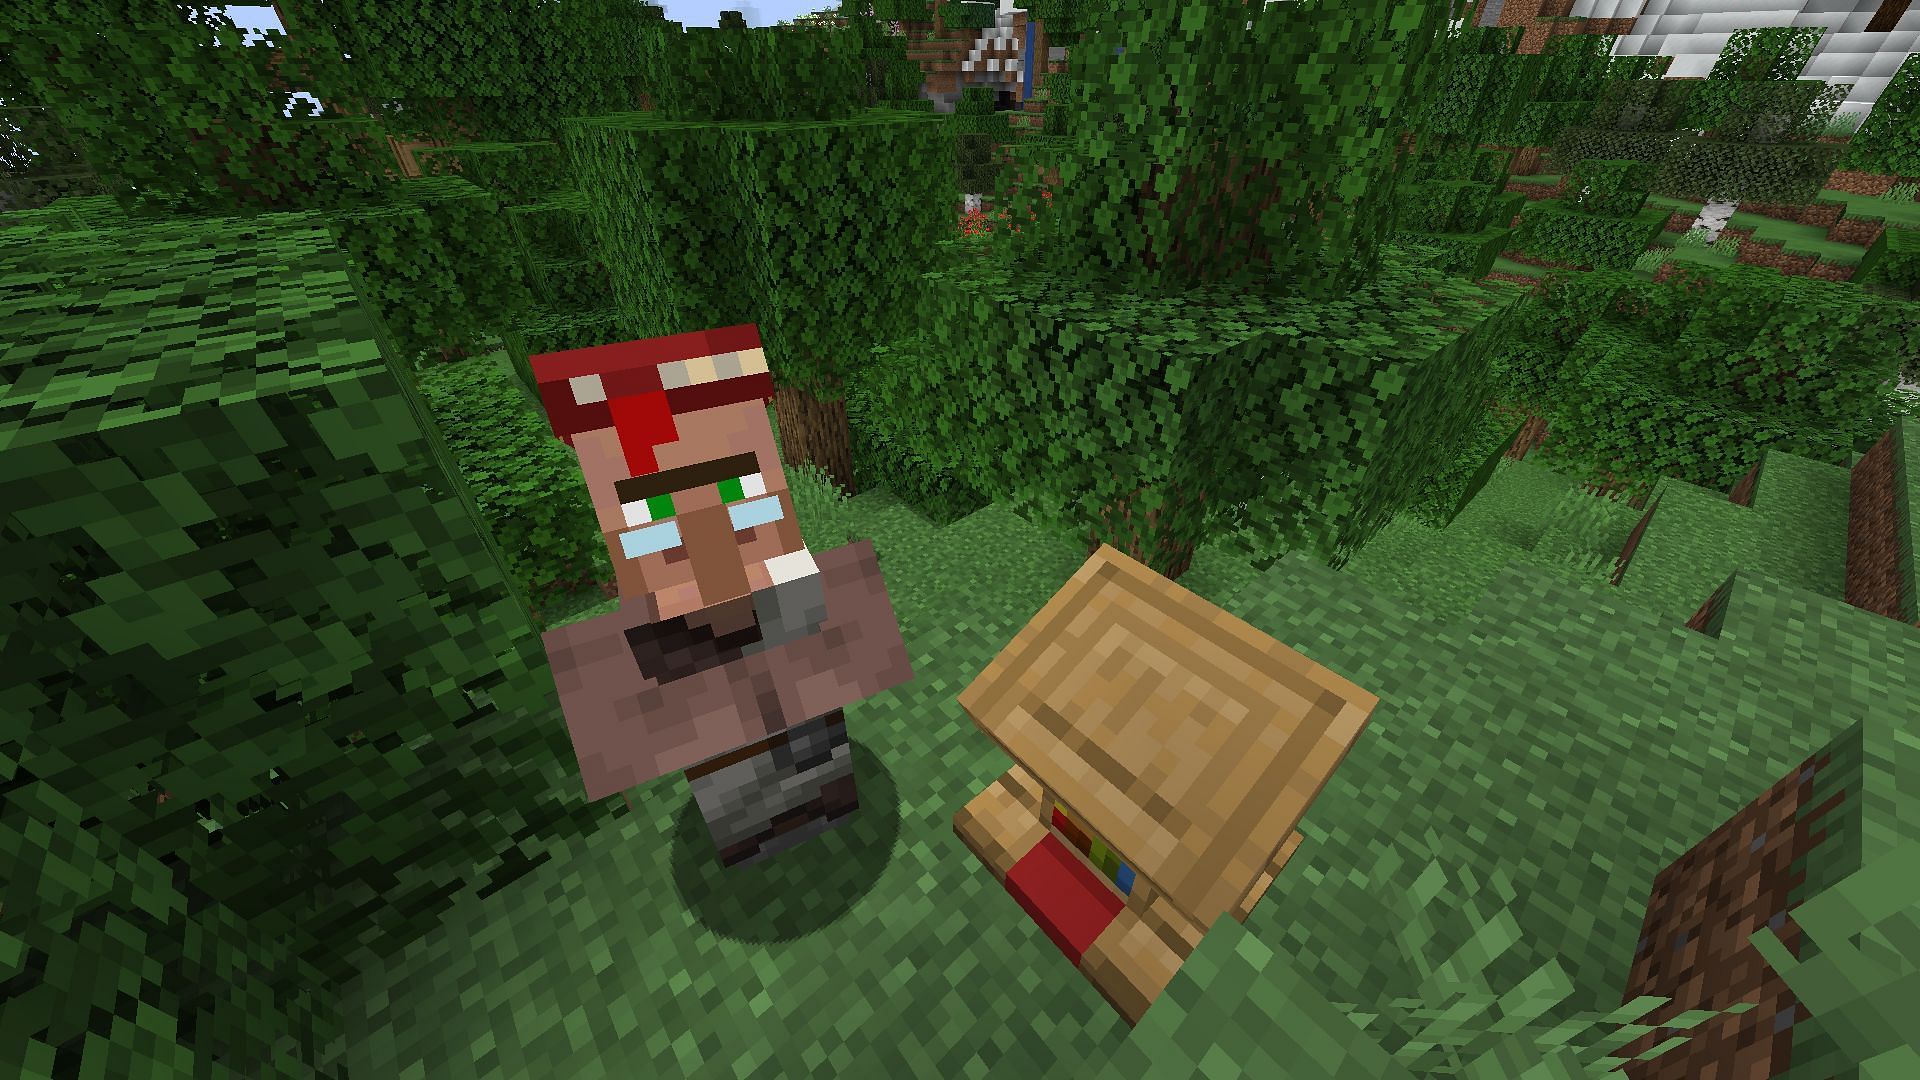 There are a few mobs that sleep in Minecraft (Image via Mojang Studios)